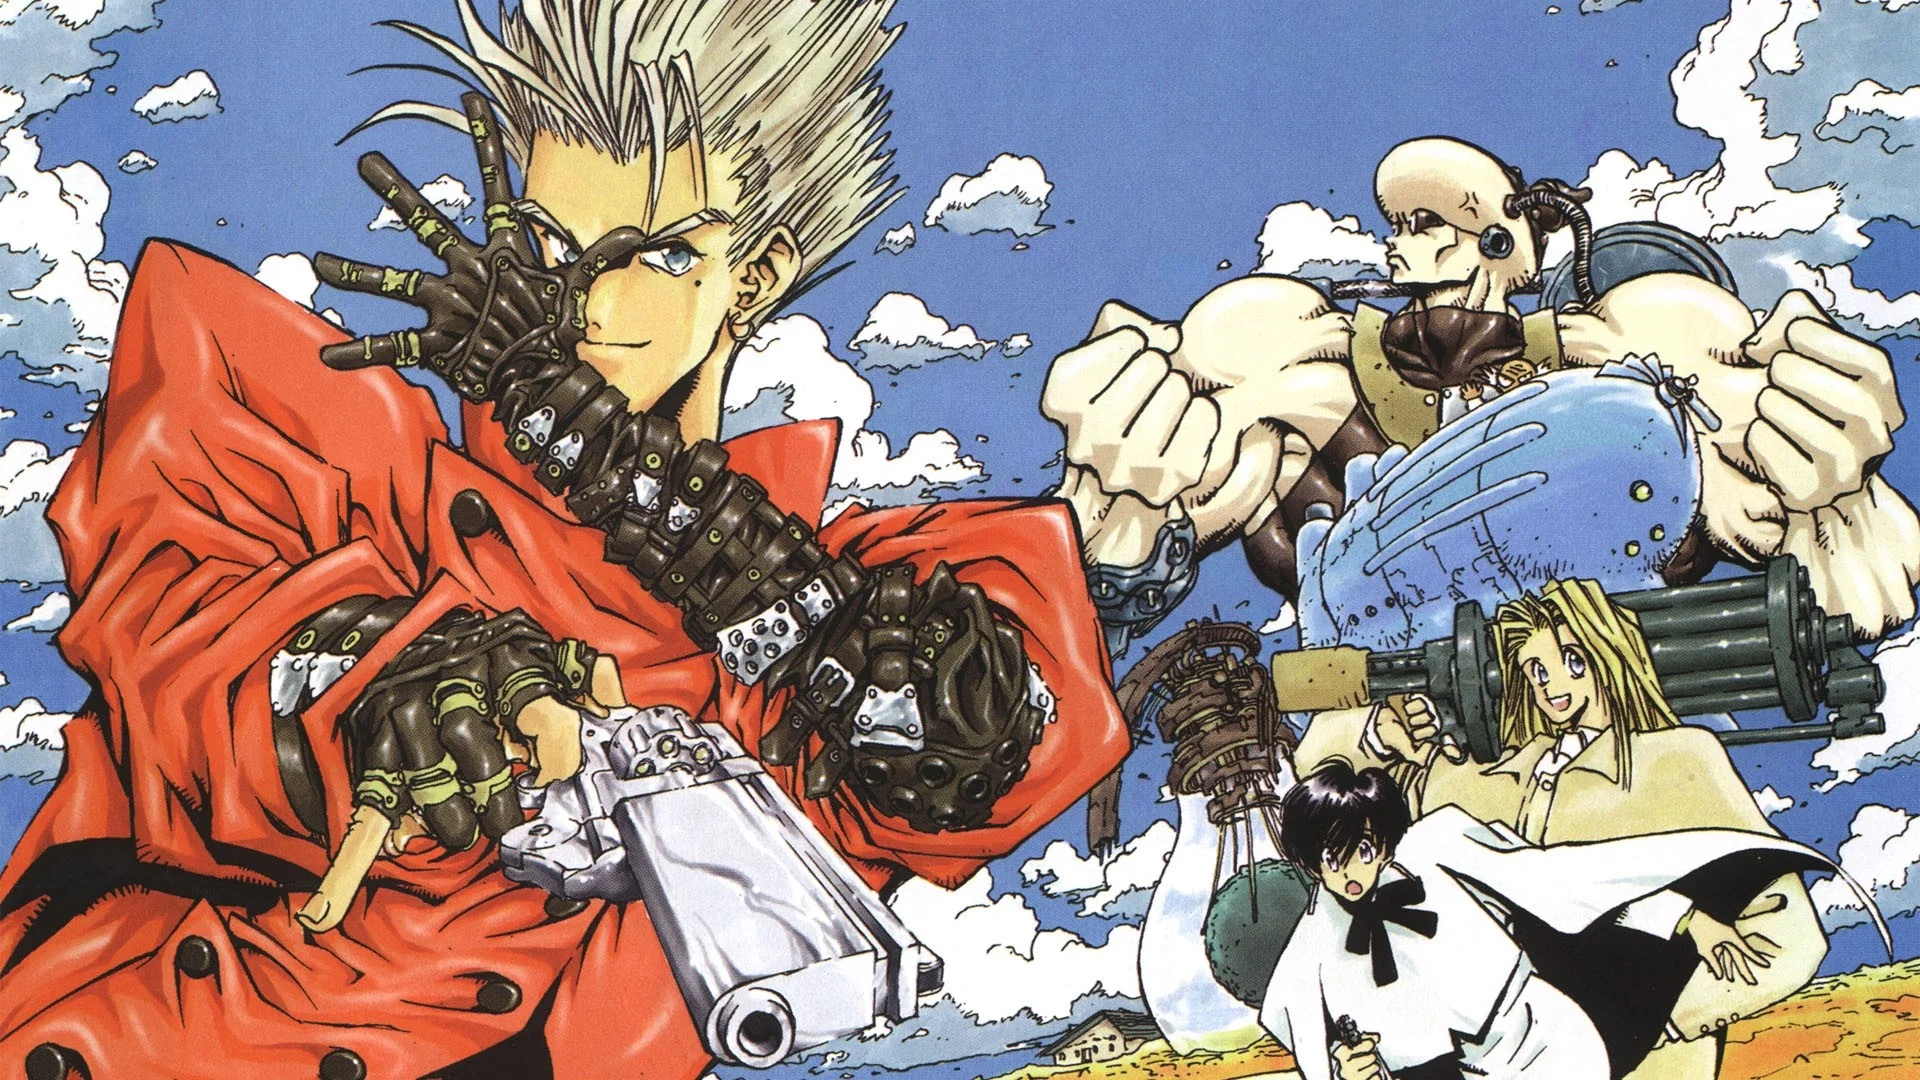 Trigun Source: Keys: anime, television, trigun, wallpaper, wallpapers.  Submitted Anonymously 3 years ago